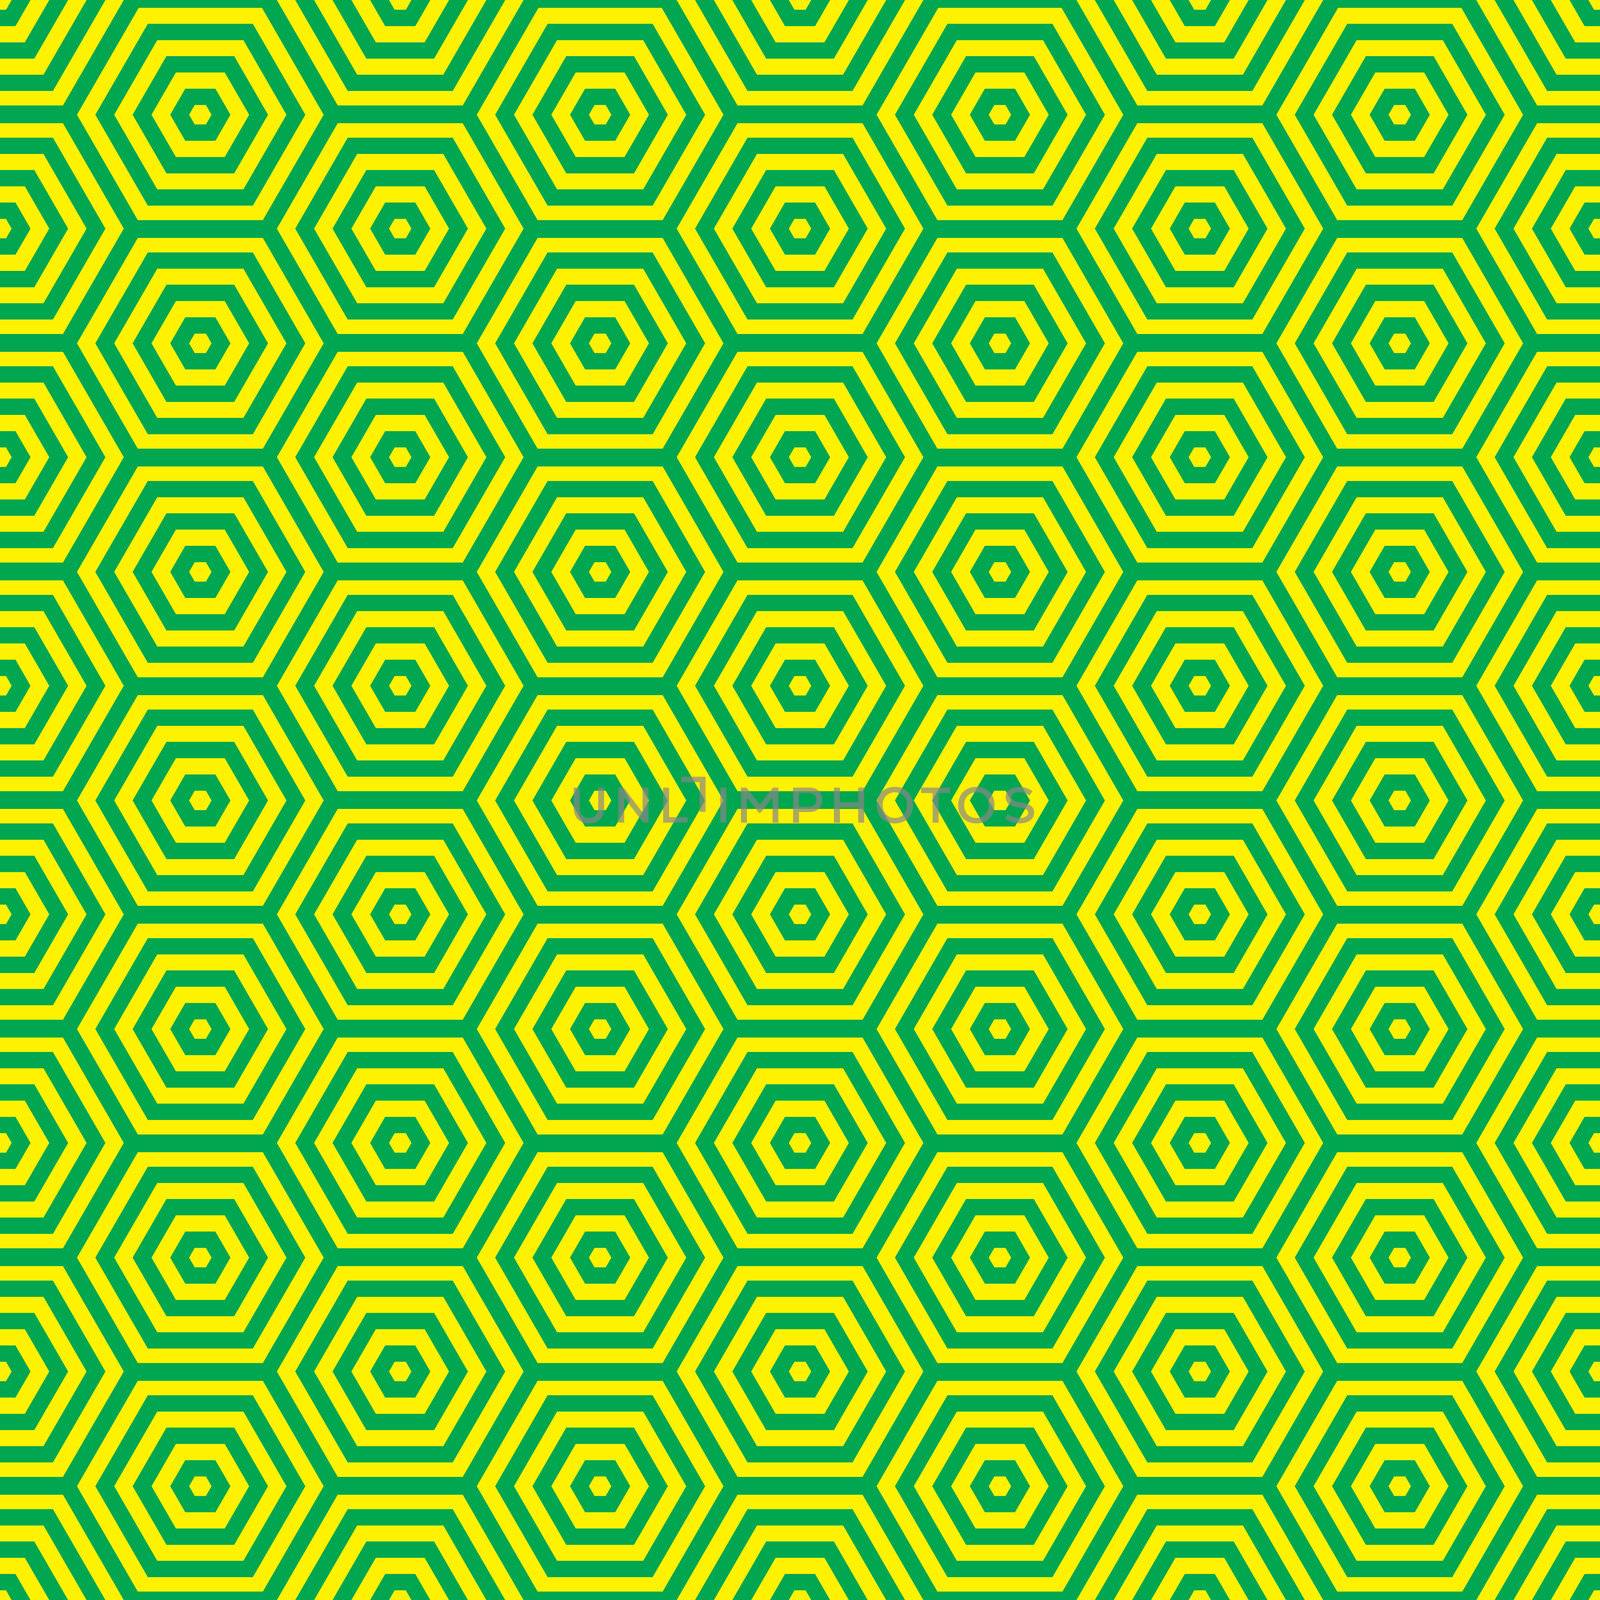 Green and yellow retro seventies inspired wallpaper pattern